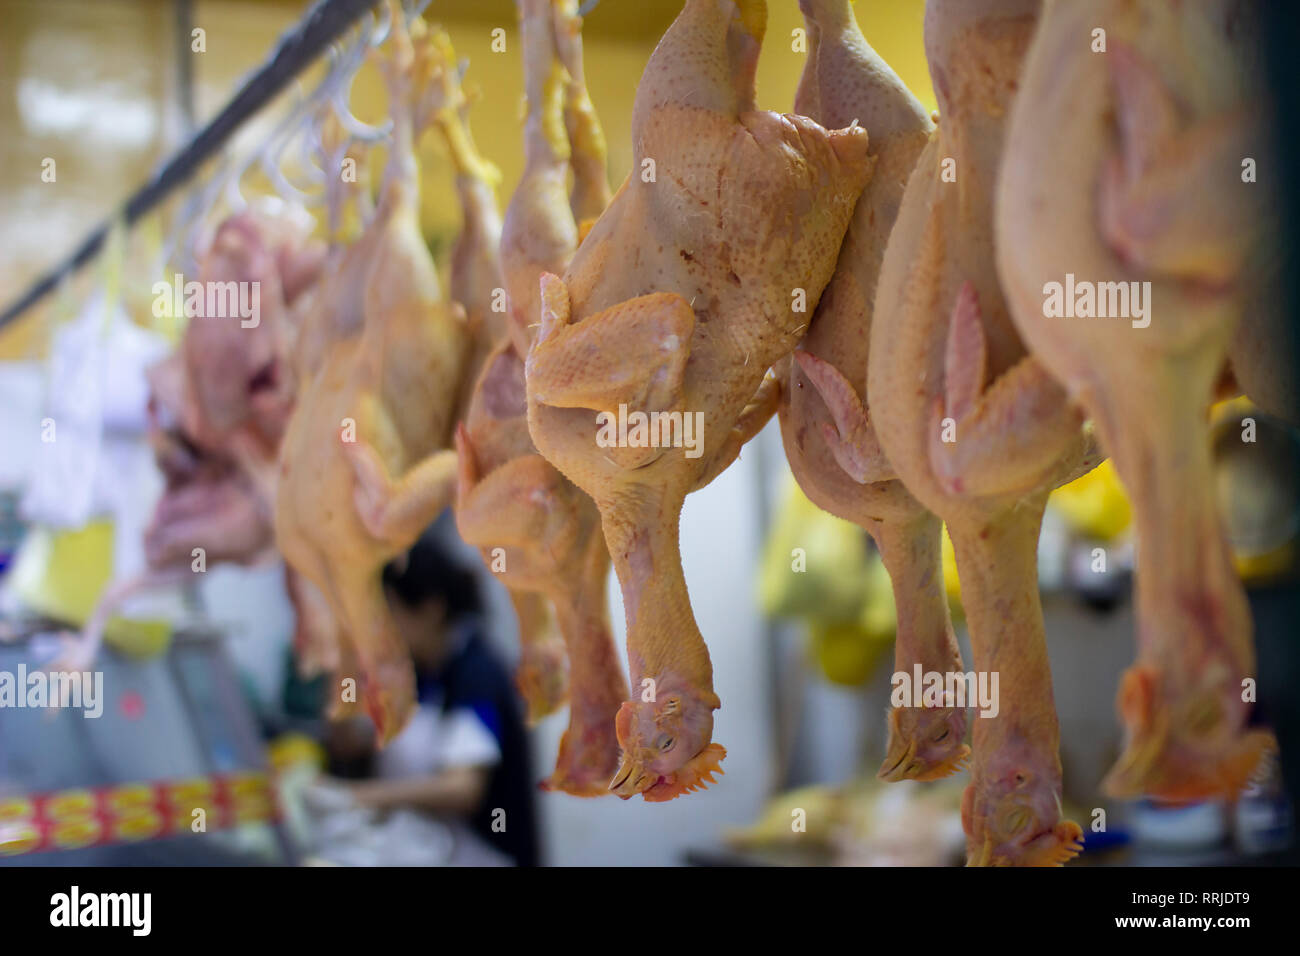 Plucked chickens hanging upside down at Barranco's market in Lima, Perú Stock Photo